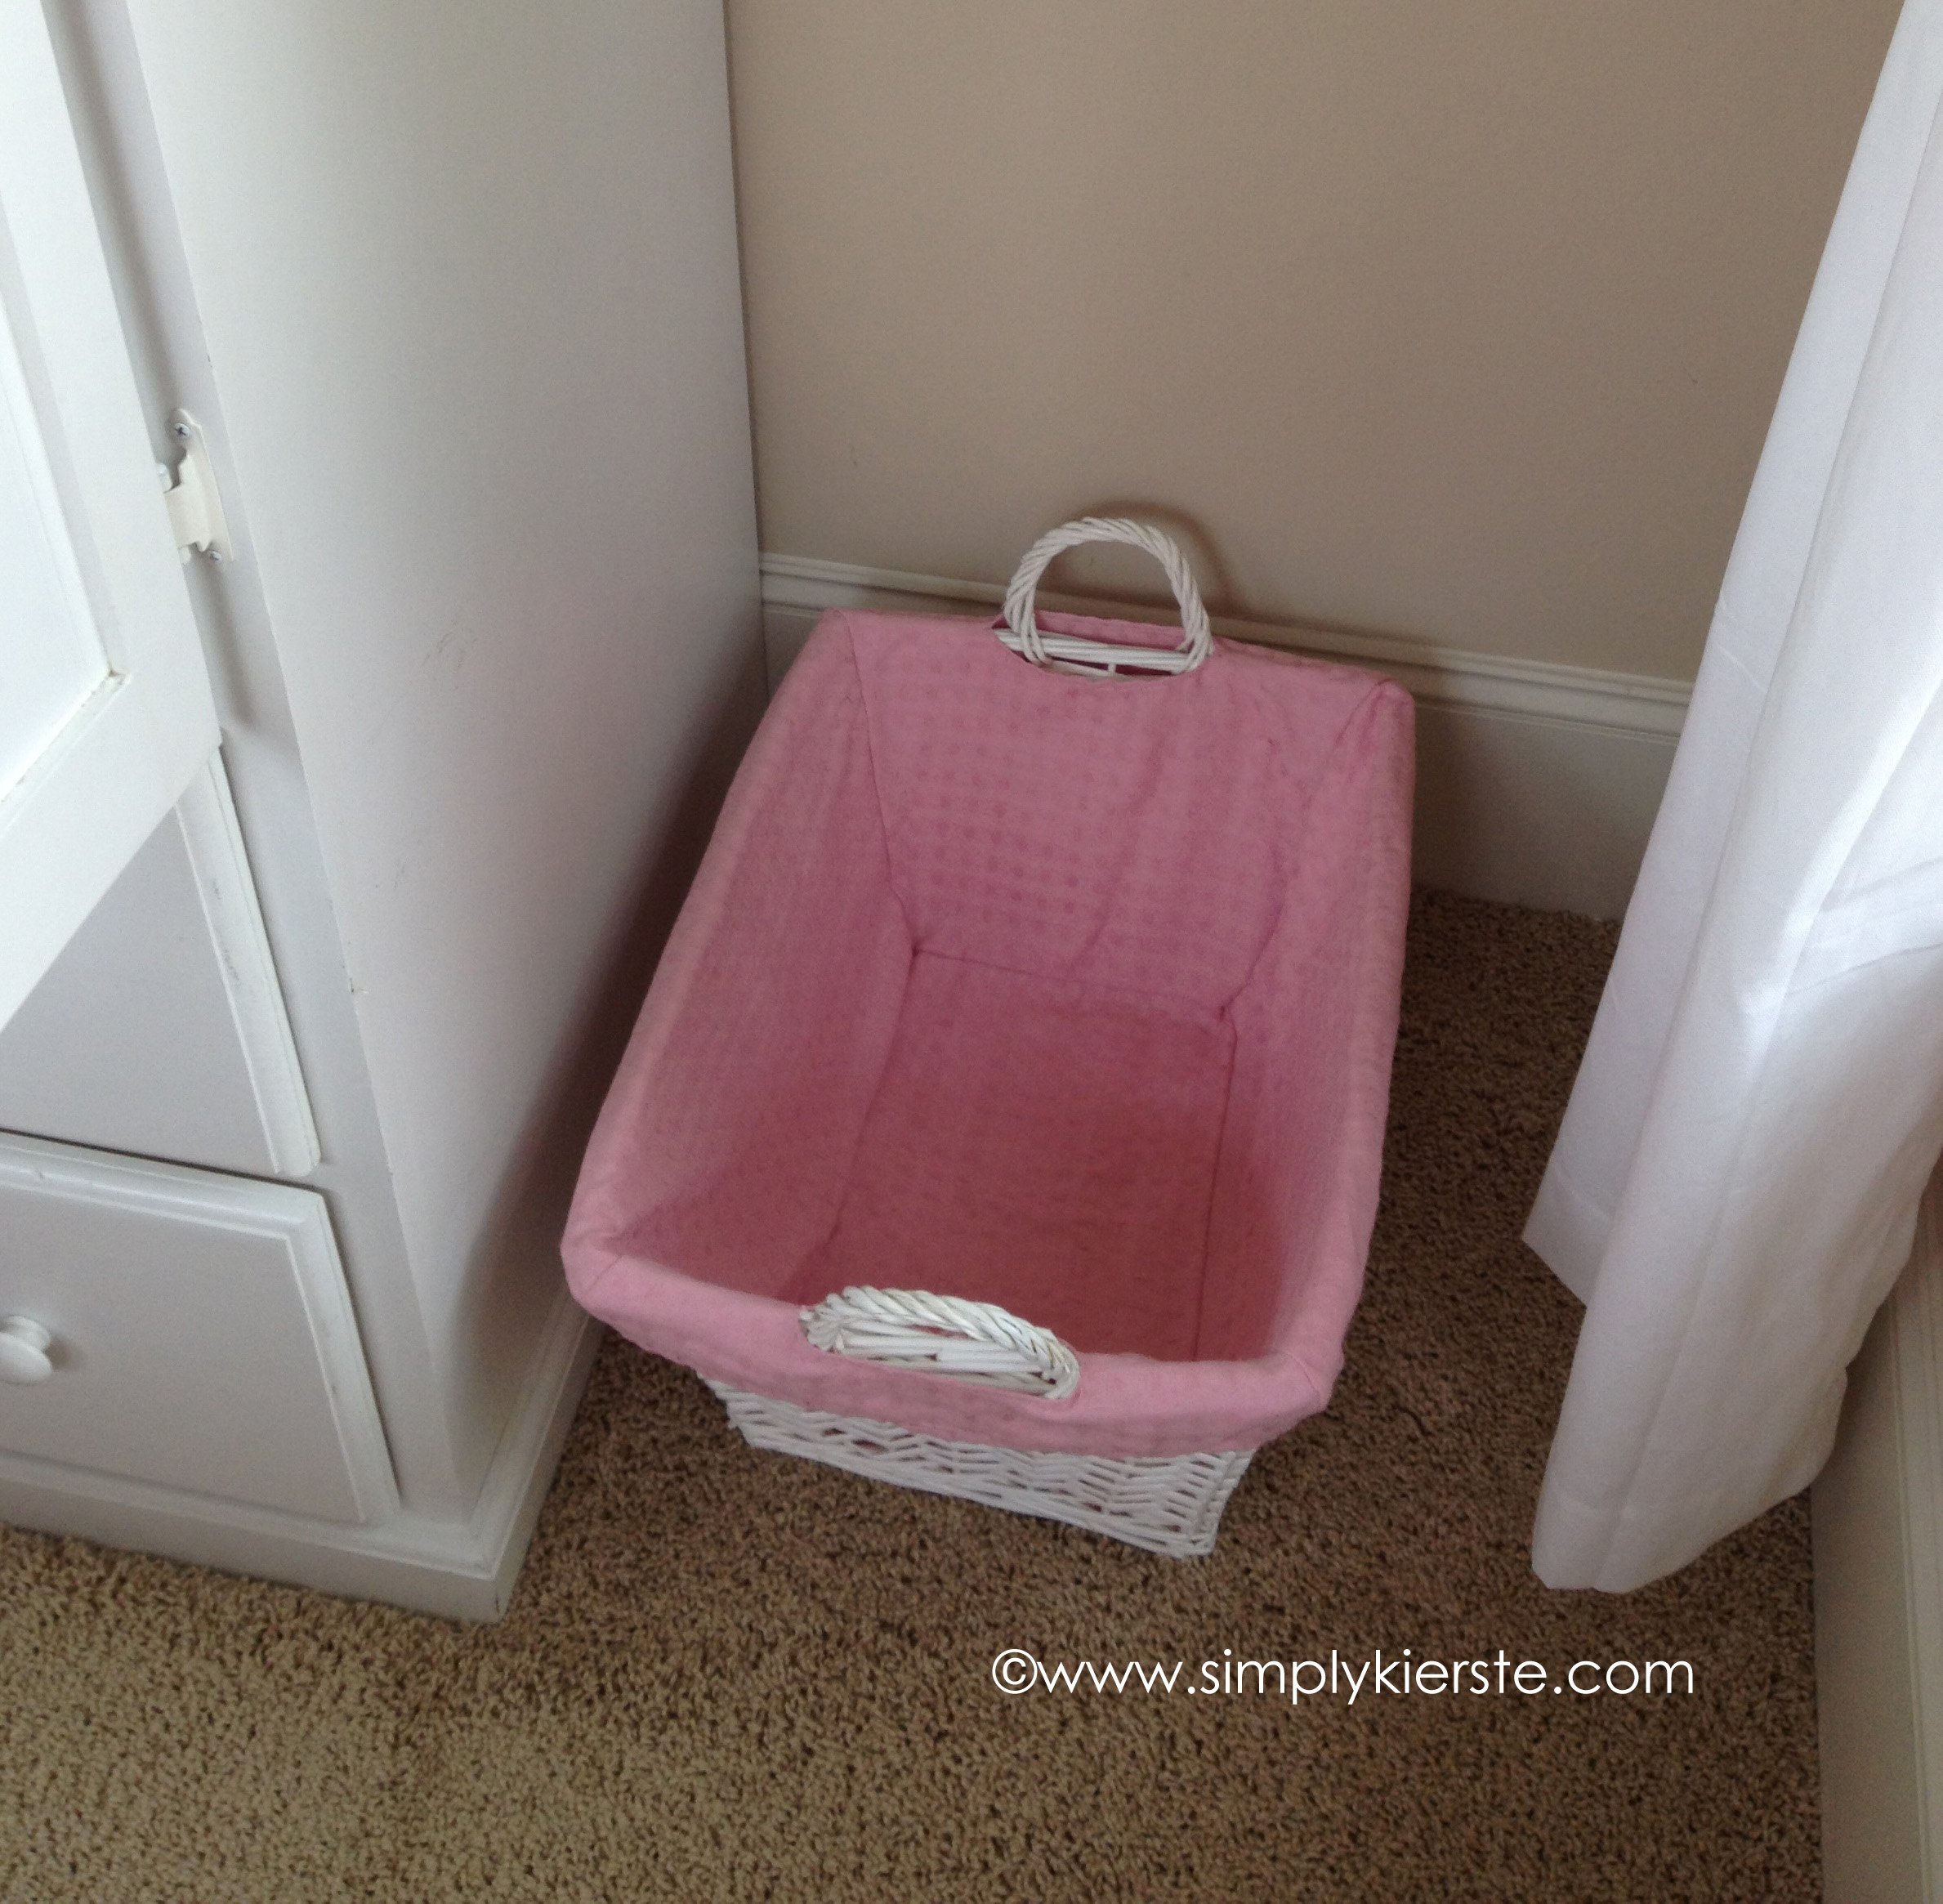 Buy Laundry Hampers for Small Bathrooms from Bed Bath & Beyond title=